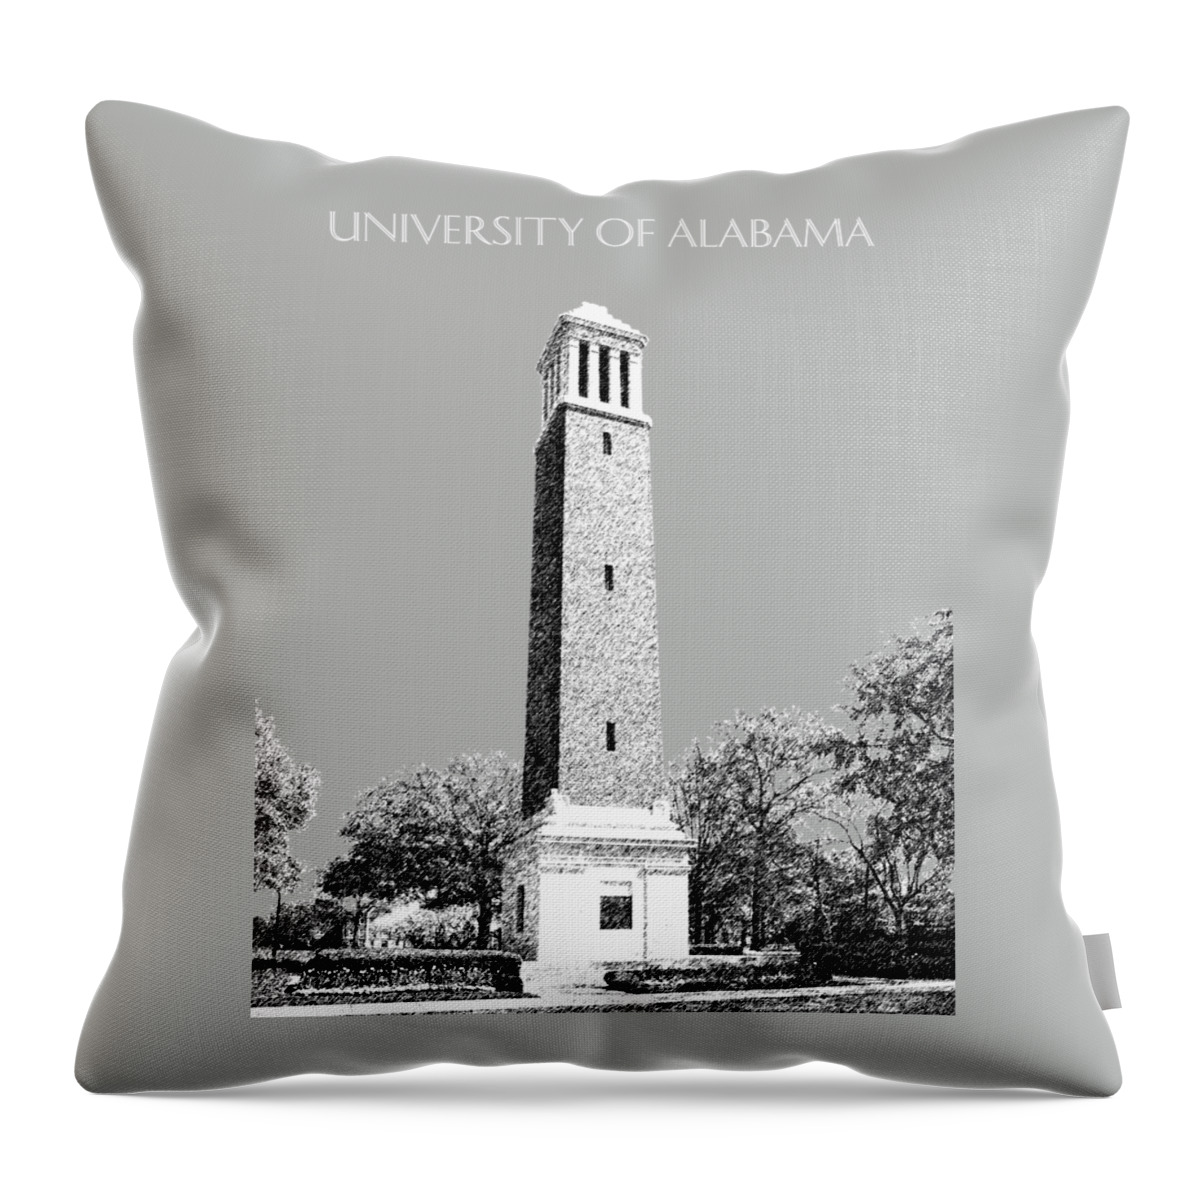 University Throw Pillow featuring the digital art University of Alabama - Silver by DB Artist